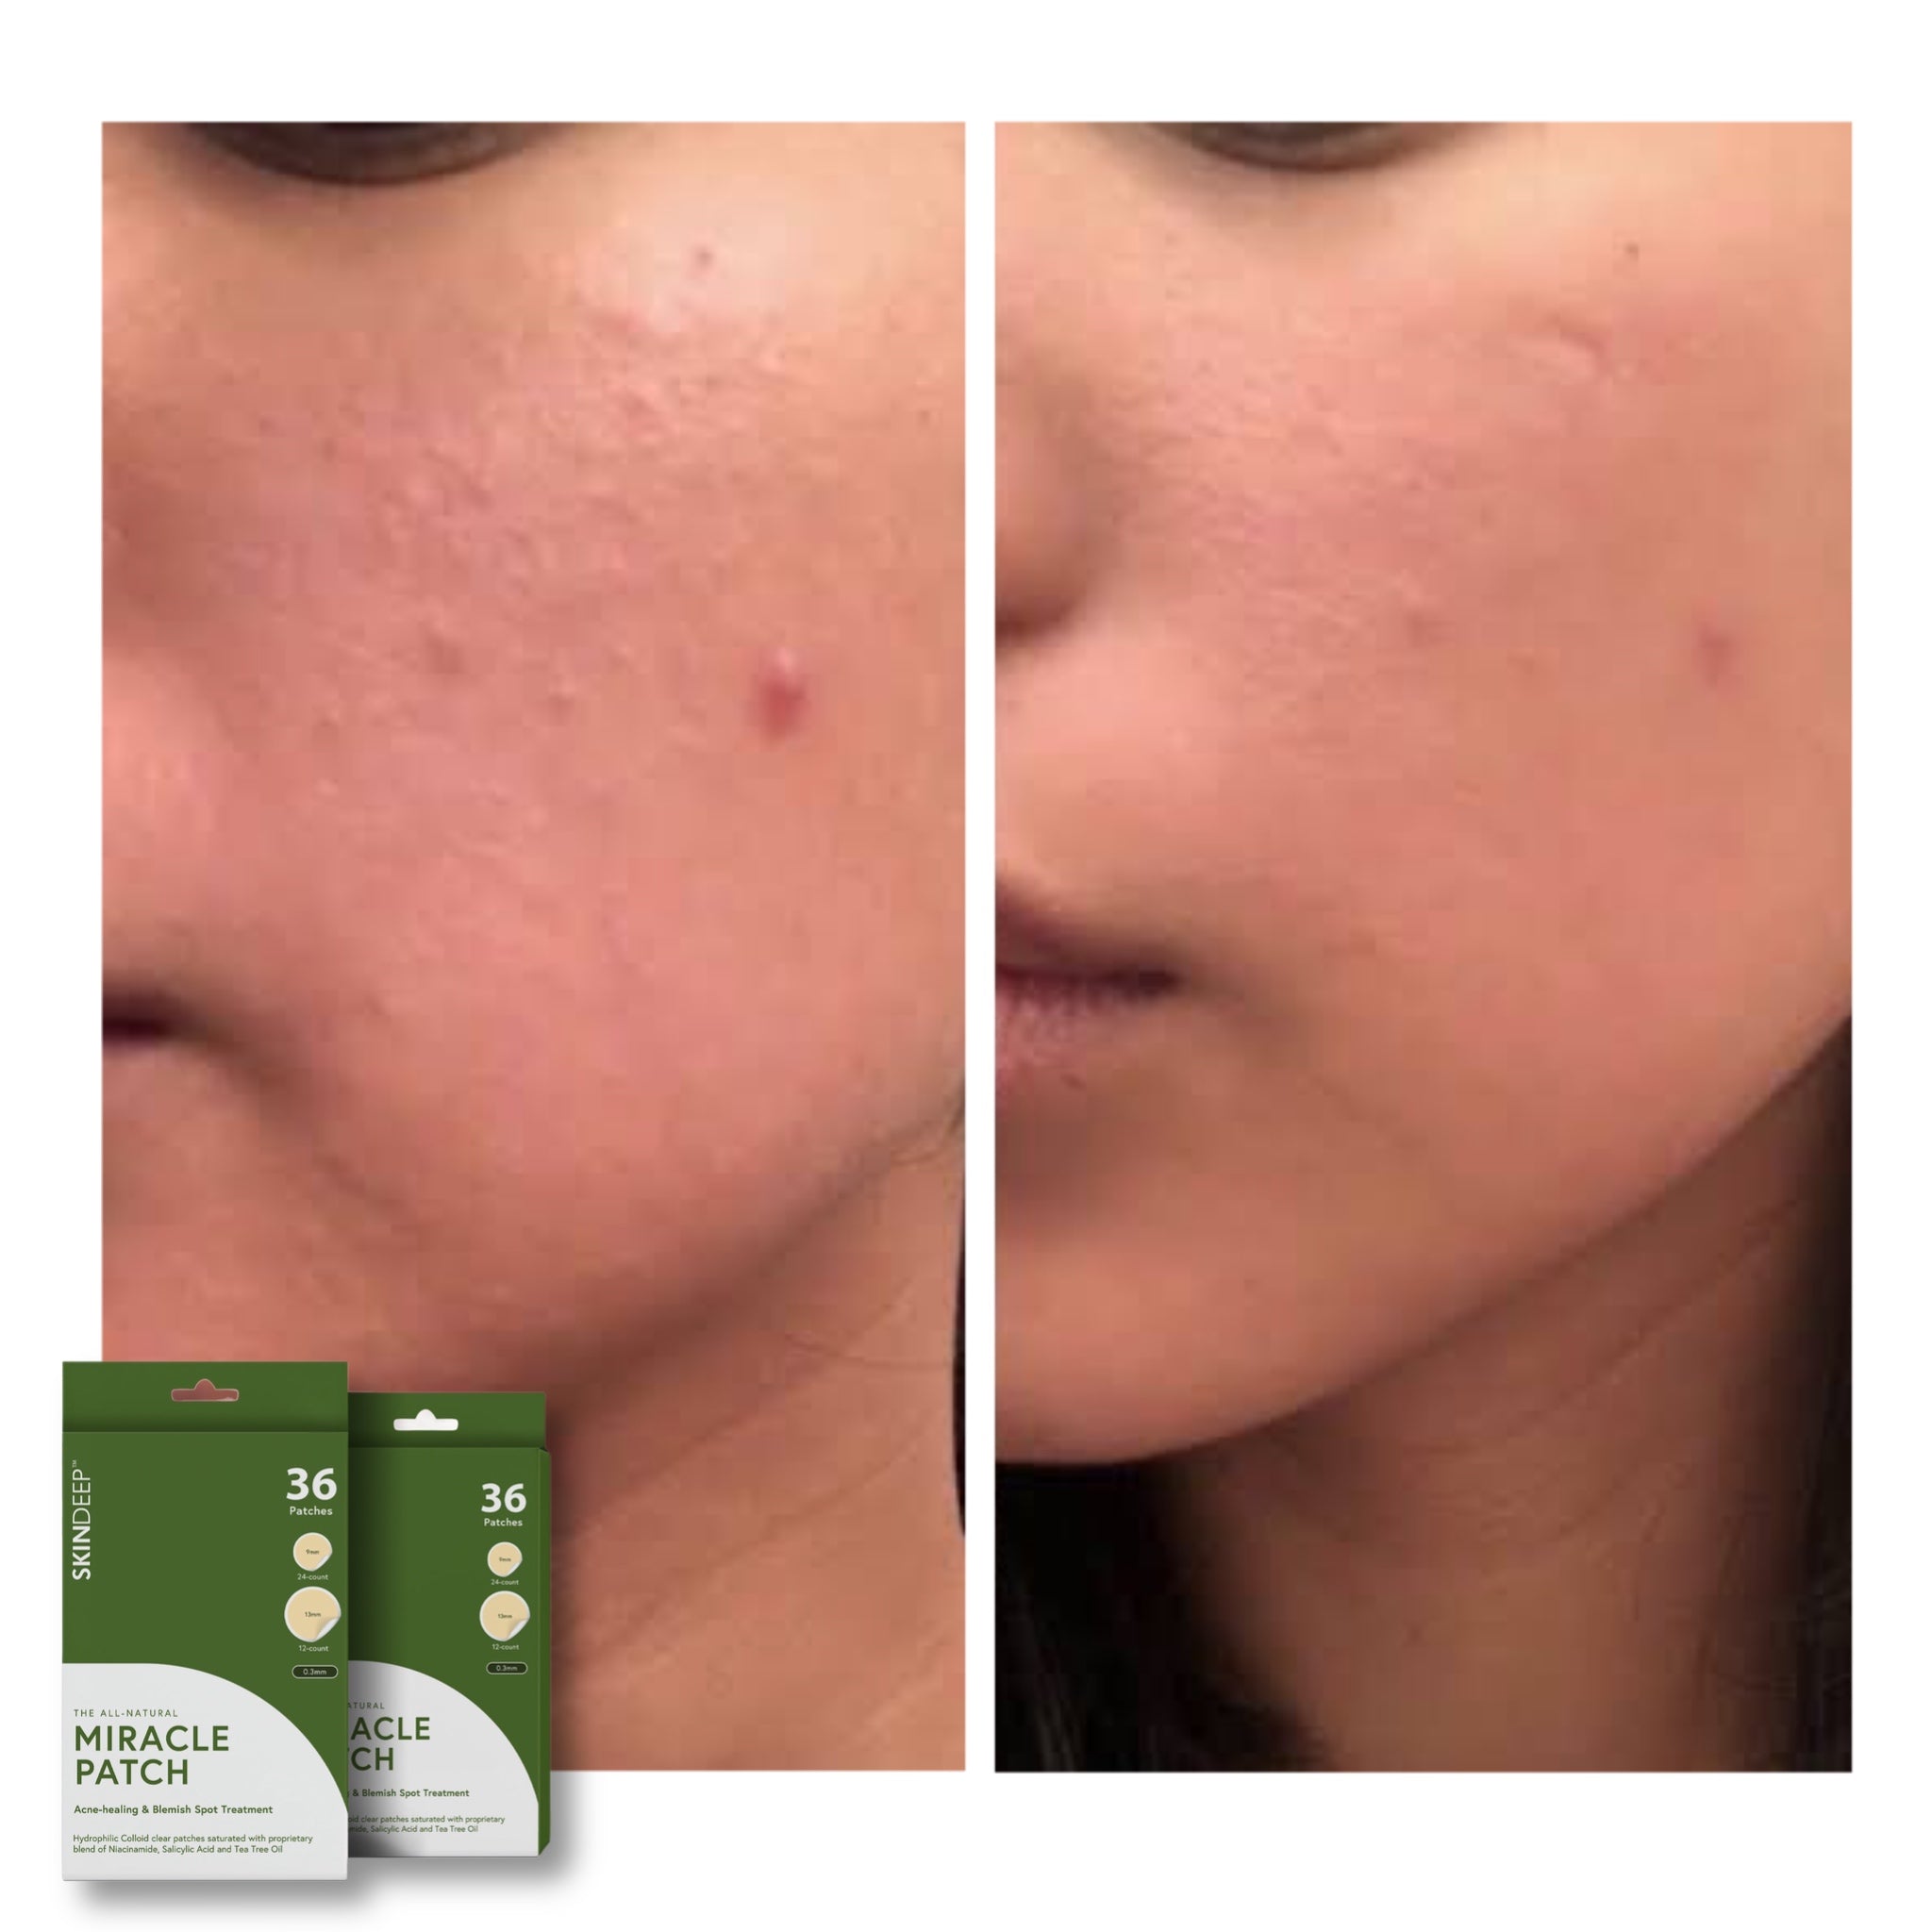 MIRACLE PATCH - Acne Healing & Blemish Spot Treatment